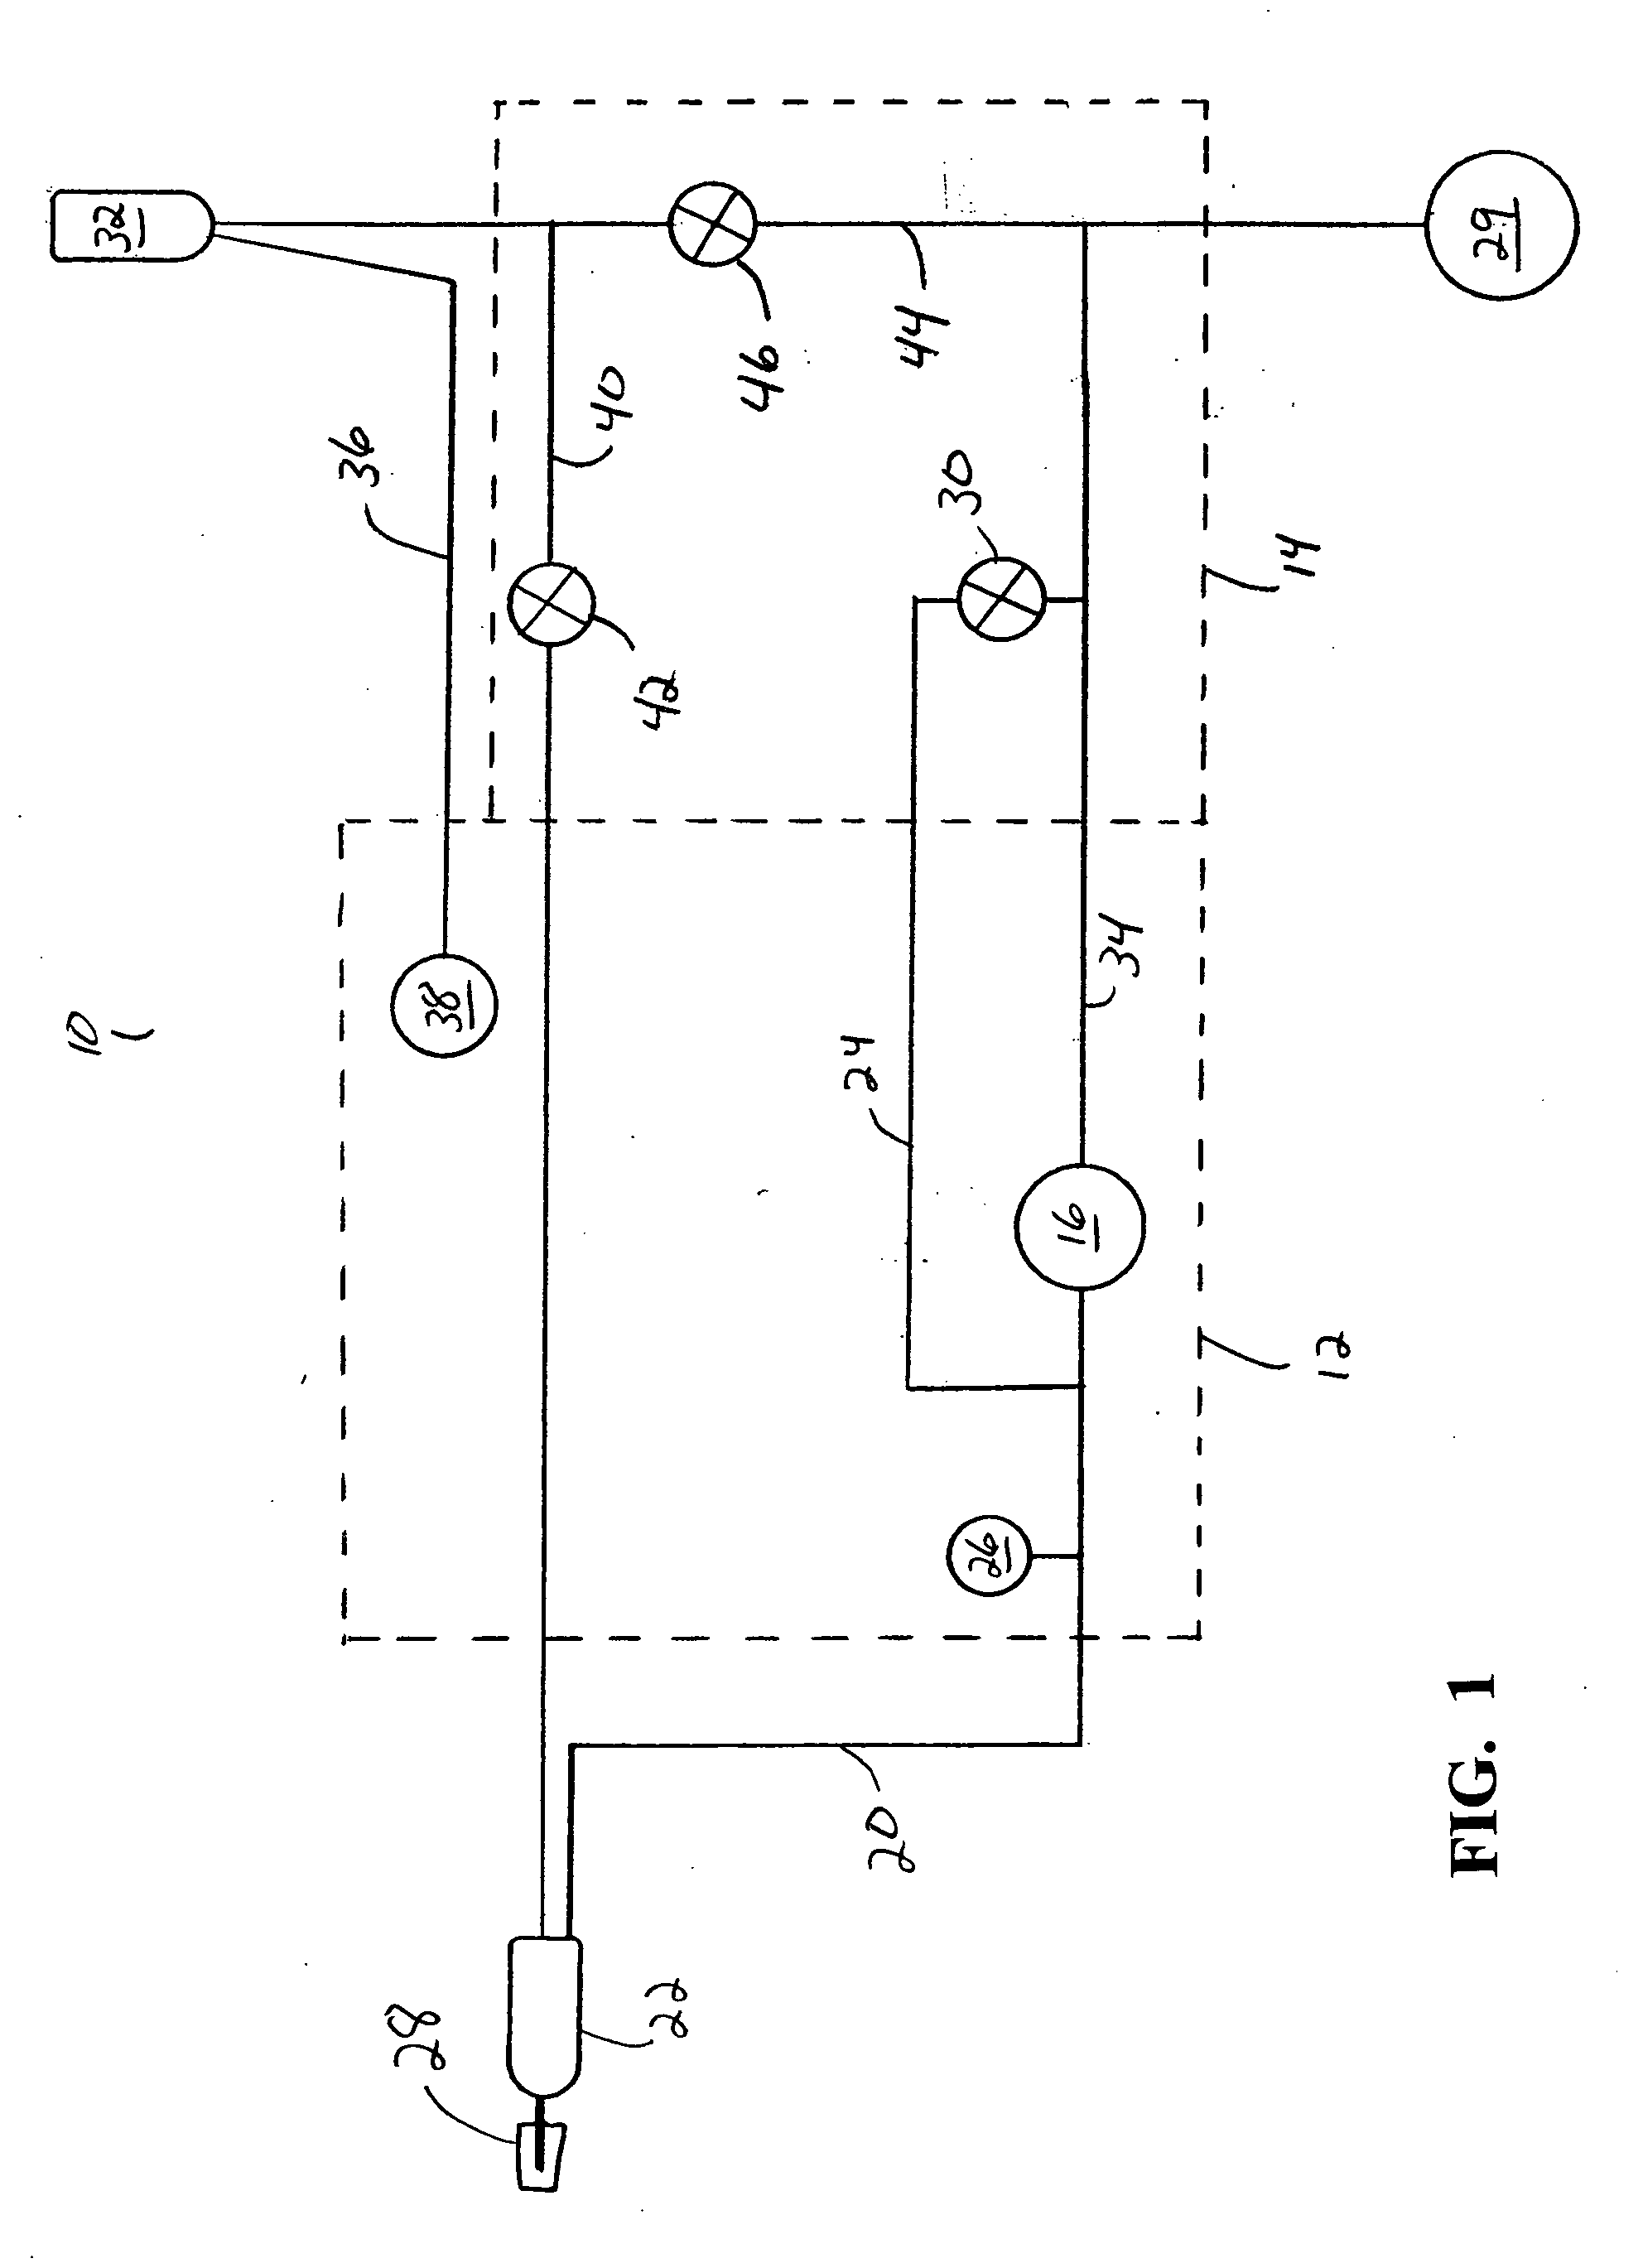 Method of testing a surgical system